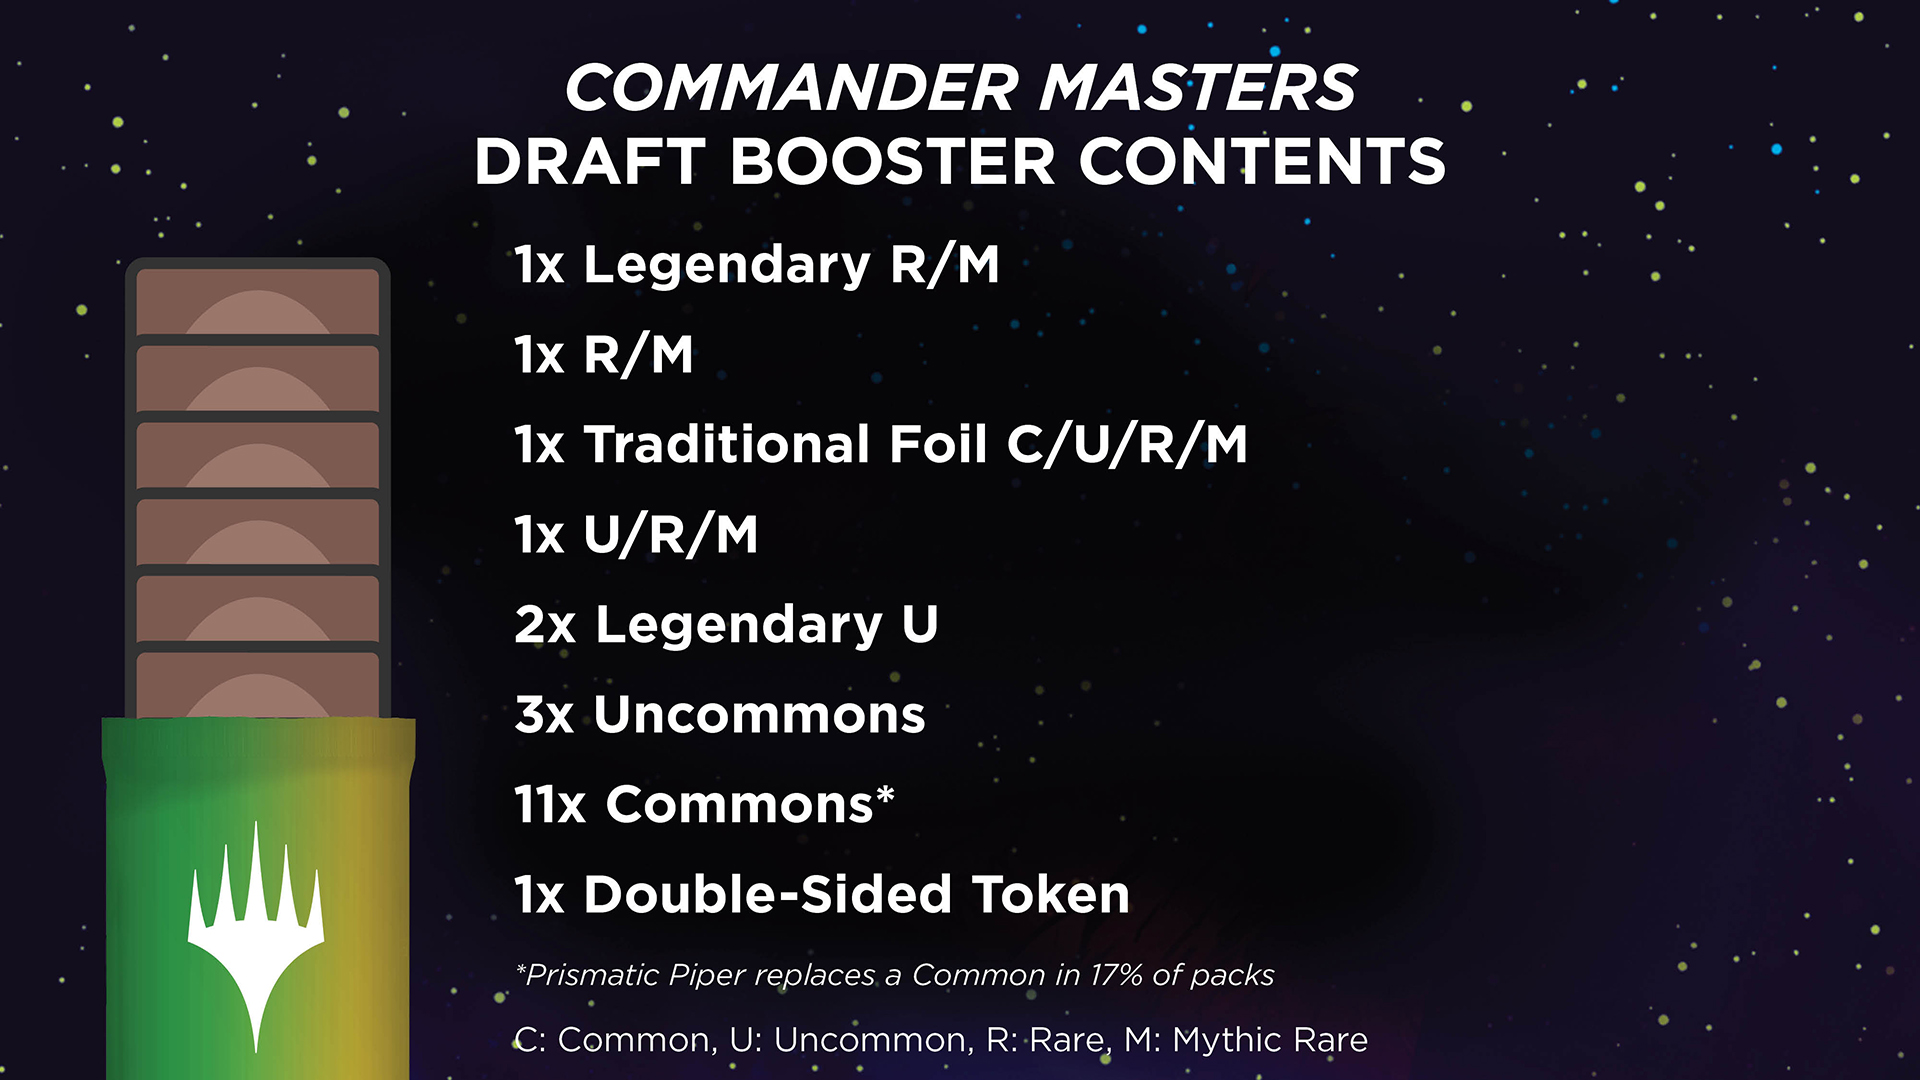 Commander Masters Draft Booster Contents